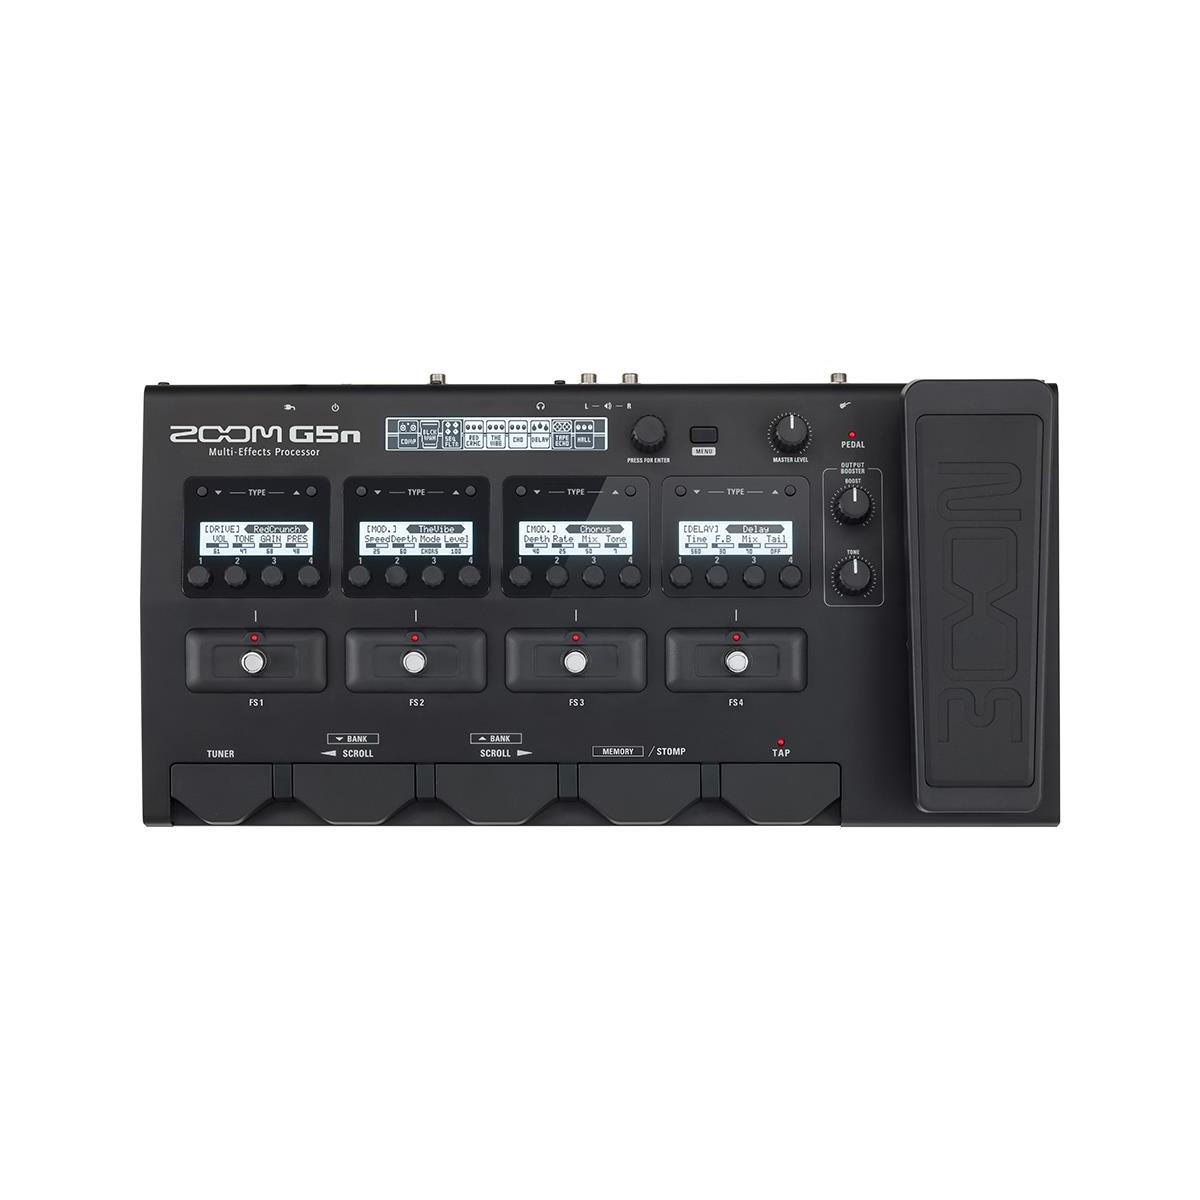 Image of Zoom G5n Guitar Multi-Effects Processor with AD-16 AC Adapter